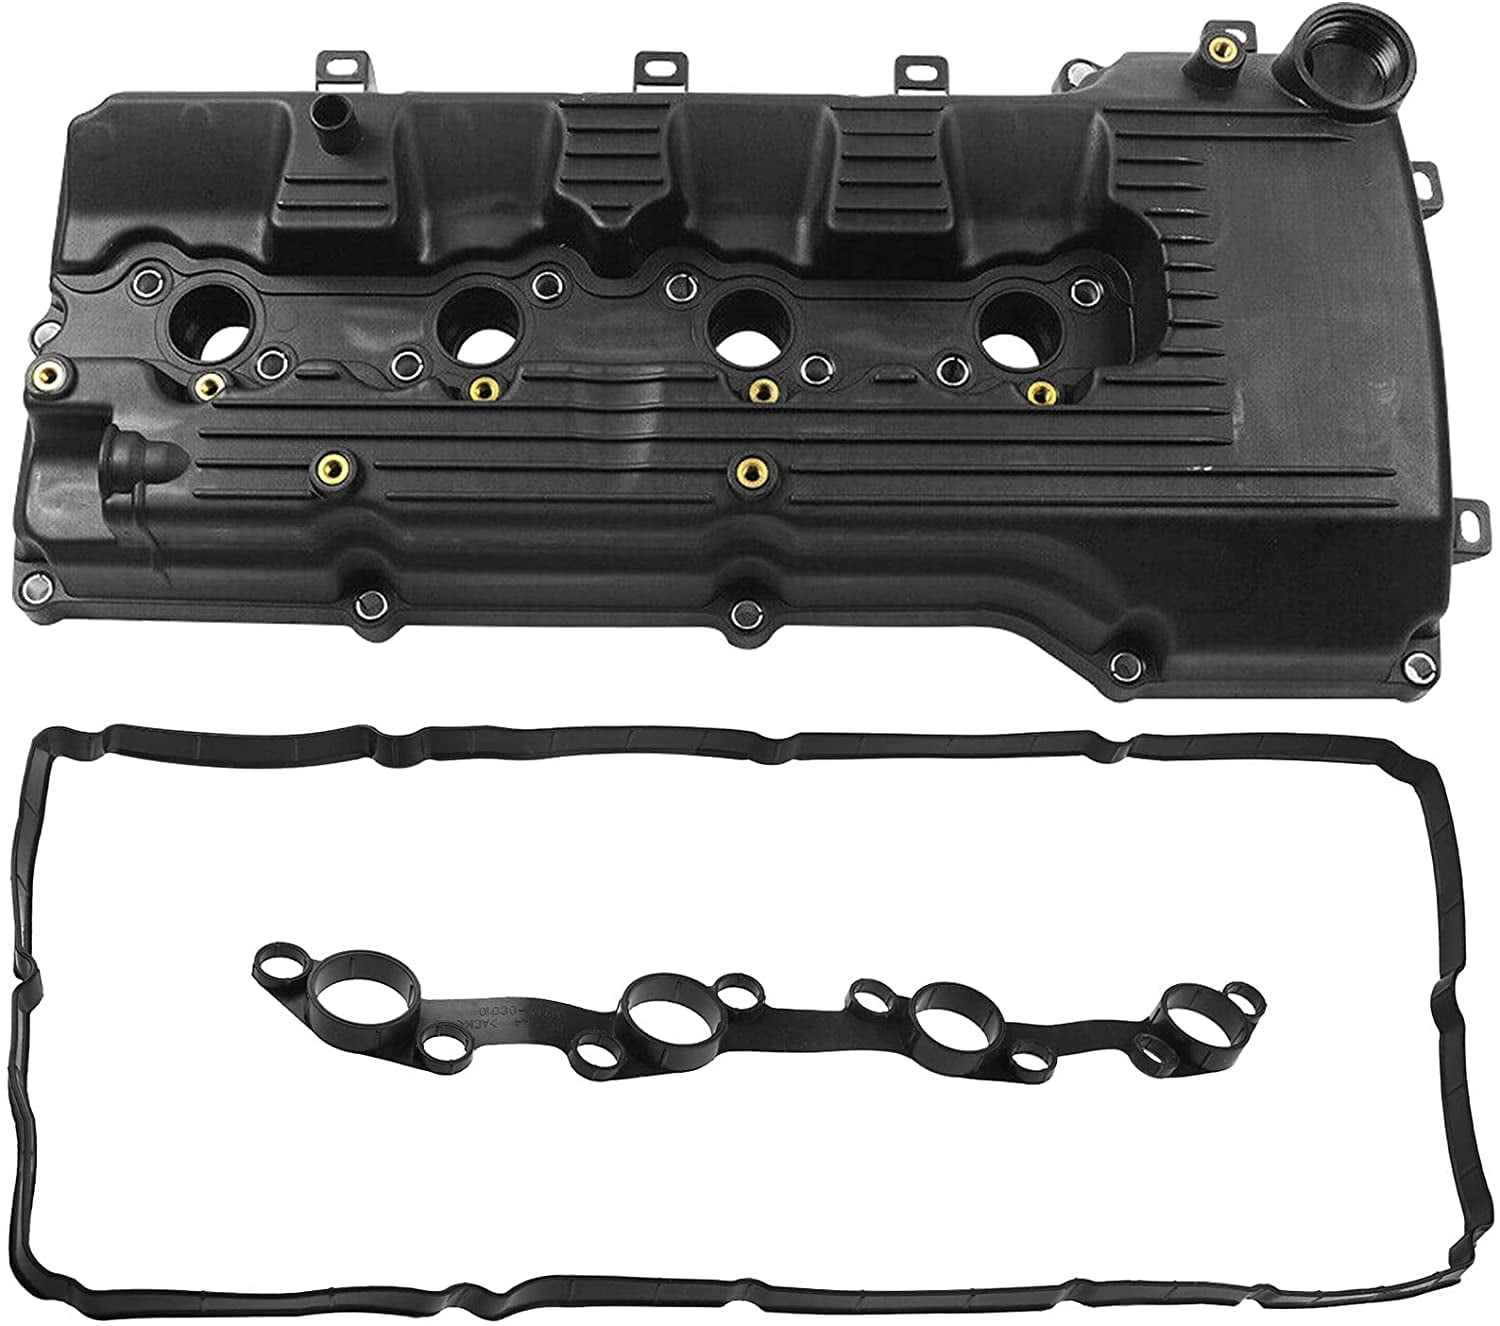 A-Premium Engine Valve Cover Kits with Gasket Compatible with Nissan 350Z Infiniti FX35 G35 2003-2008 M35 2006-2010 2003-2009 V6 3.5L Side 2-PC Set